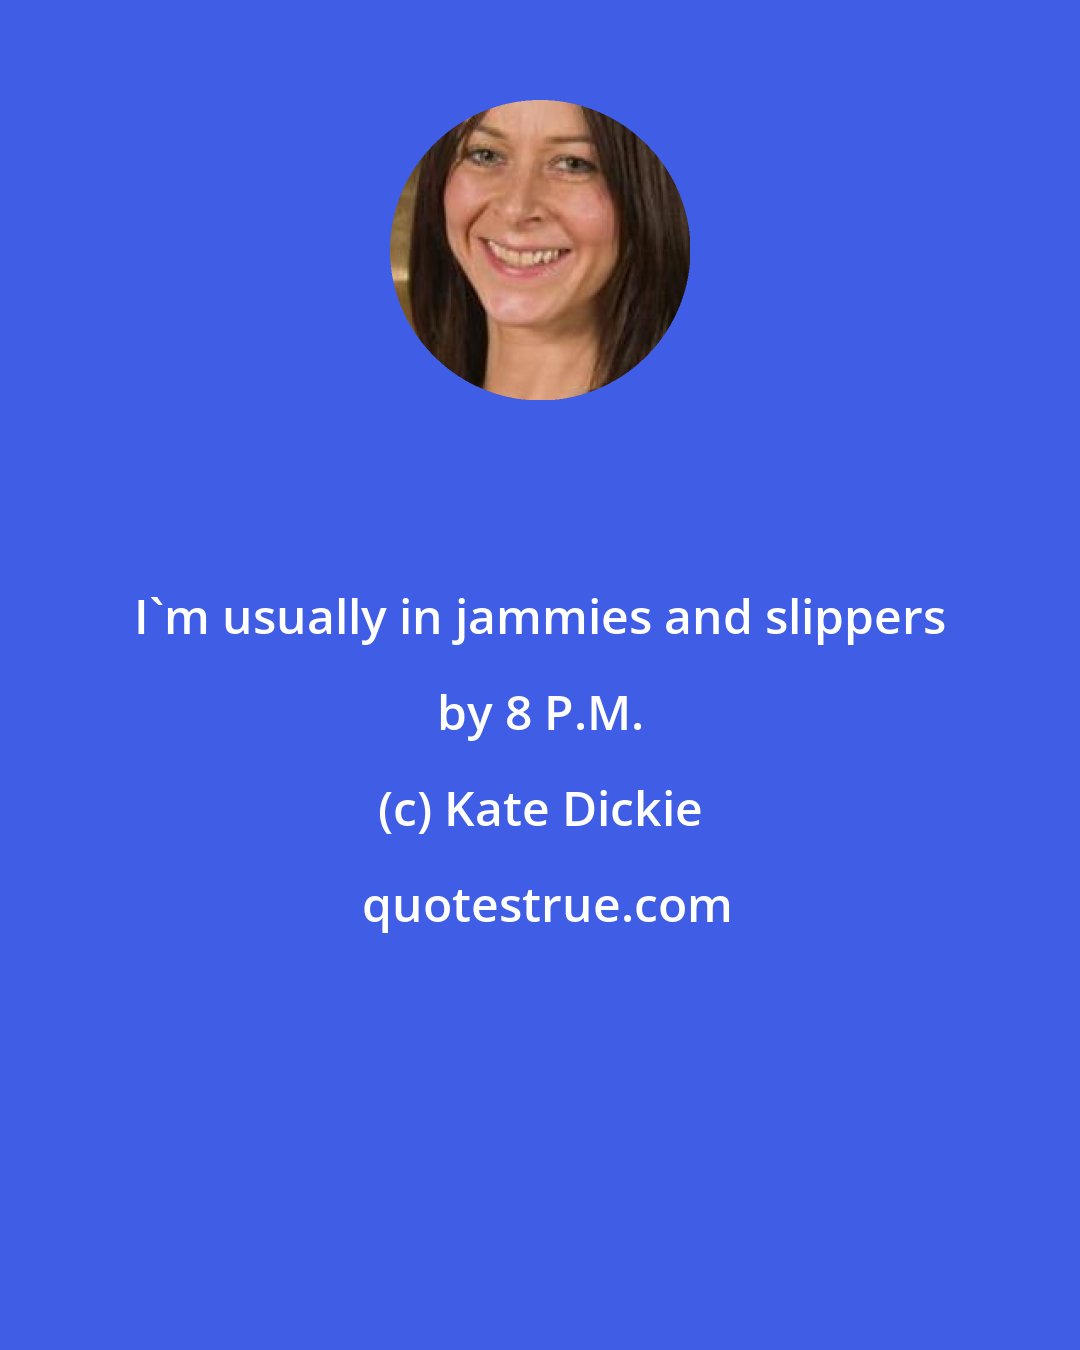 Kate Dickie: I'm usually in jammies and slippers by 8 P.M.